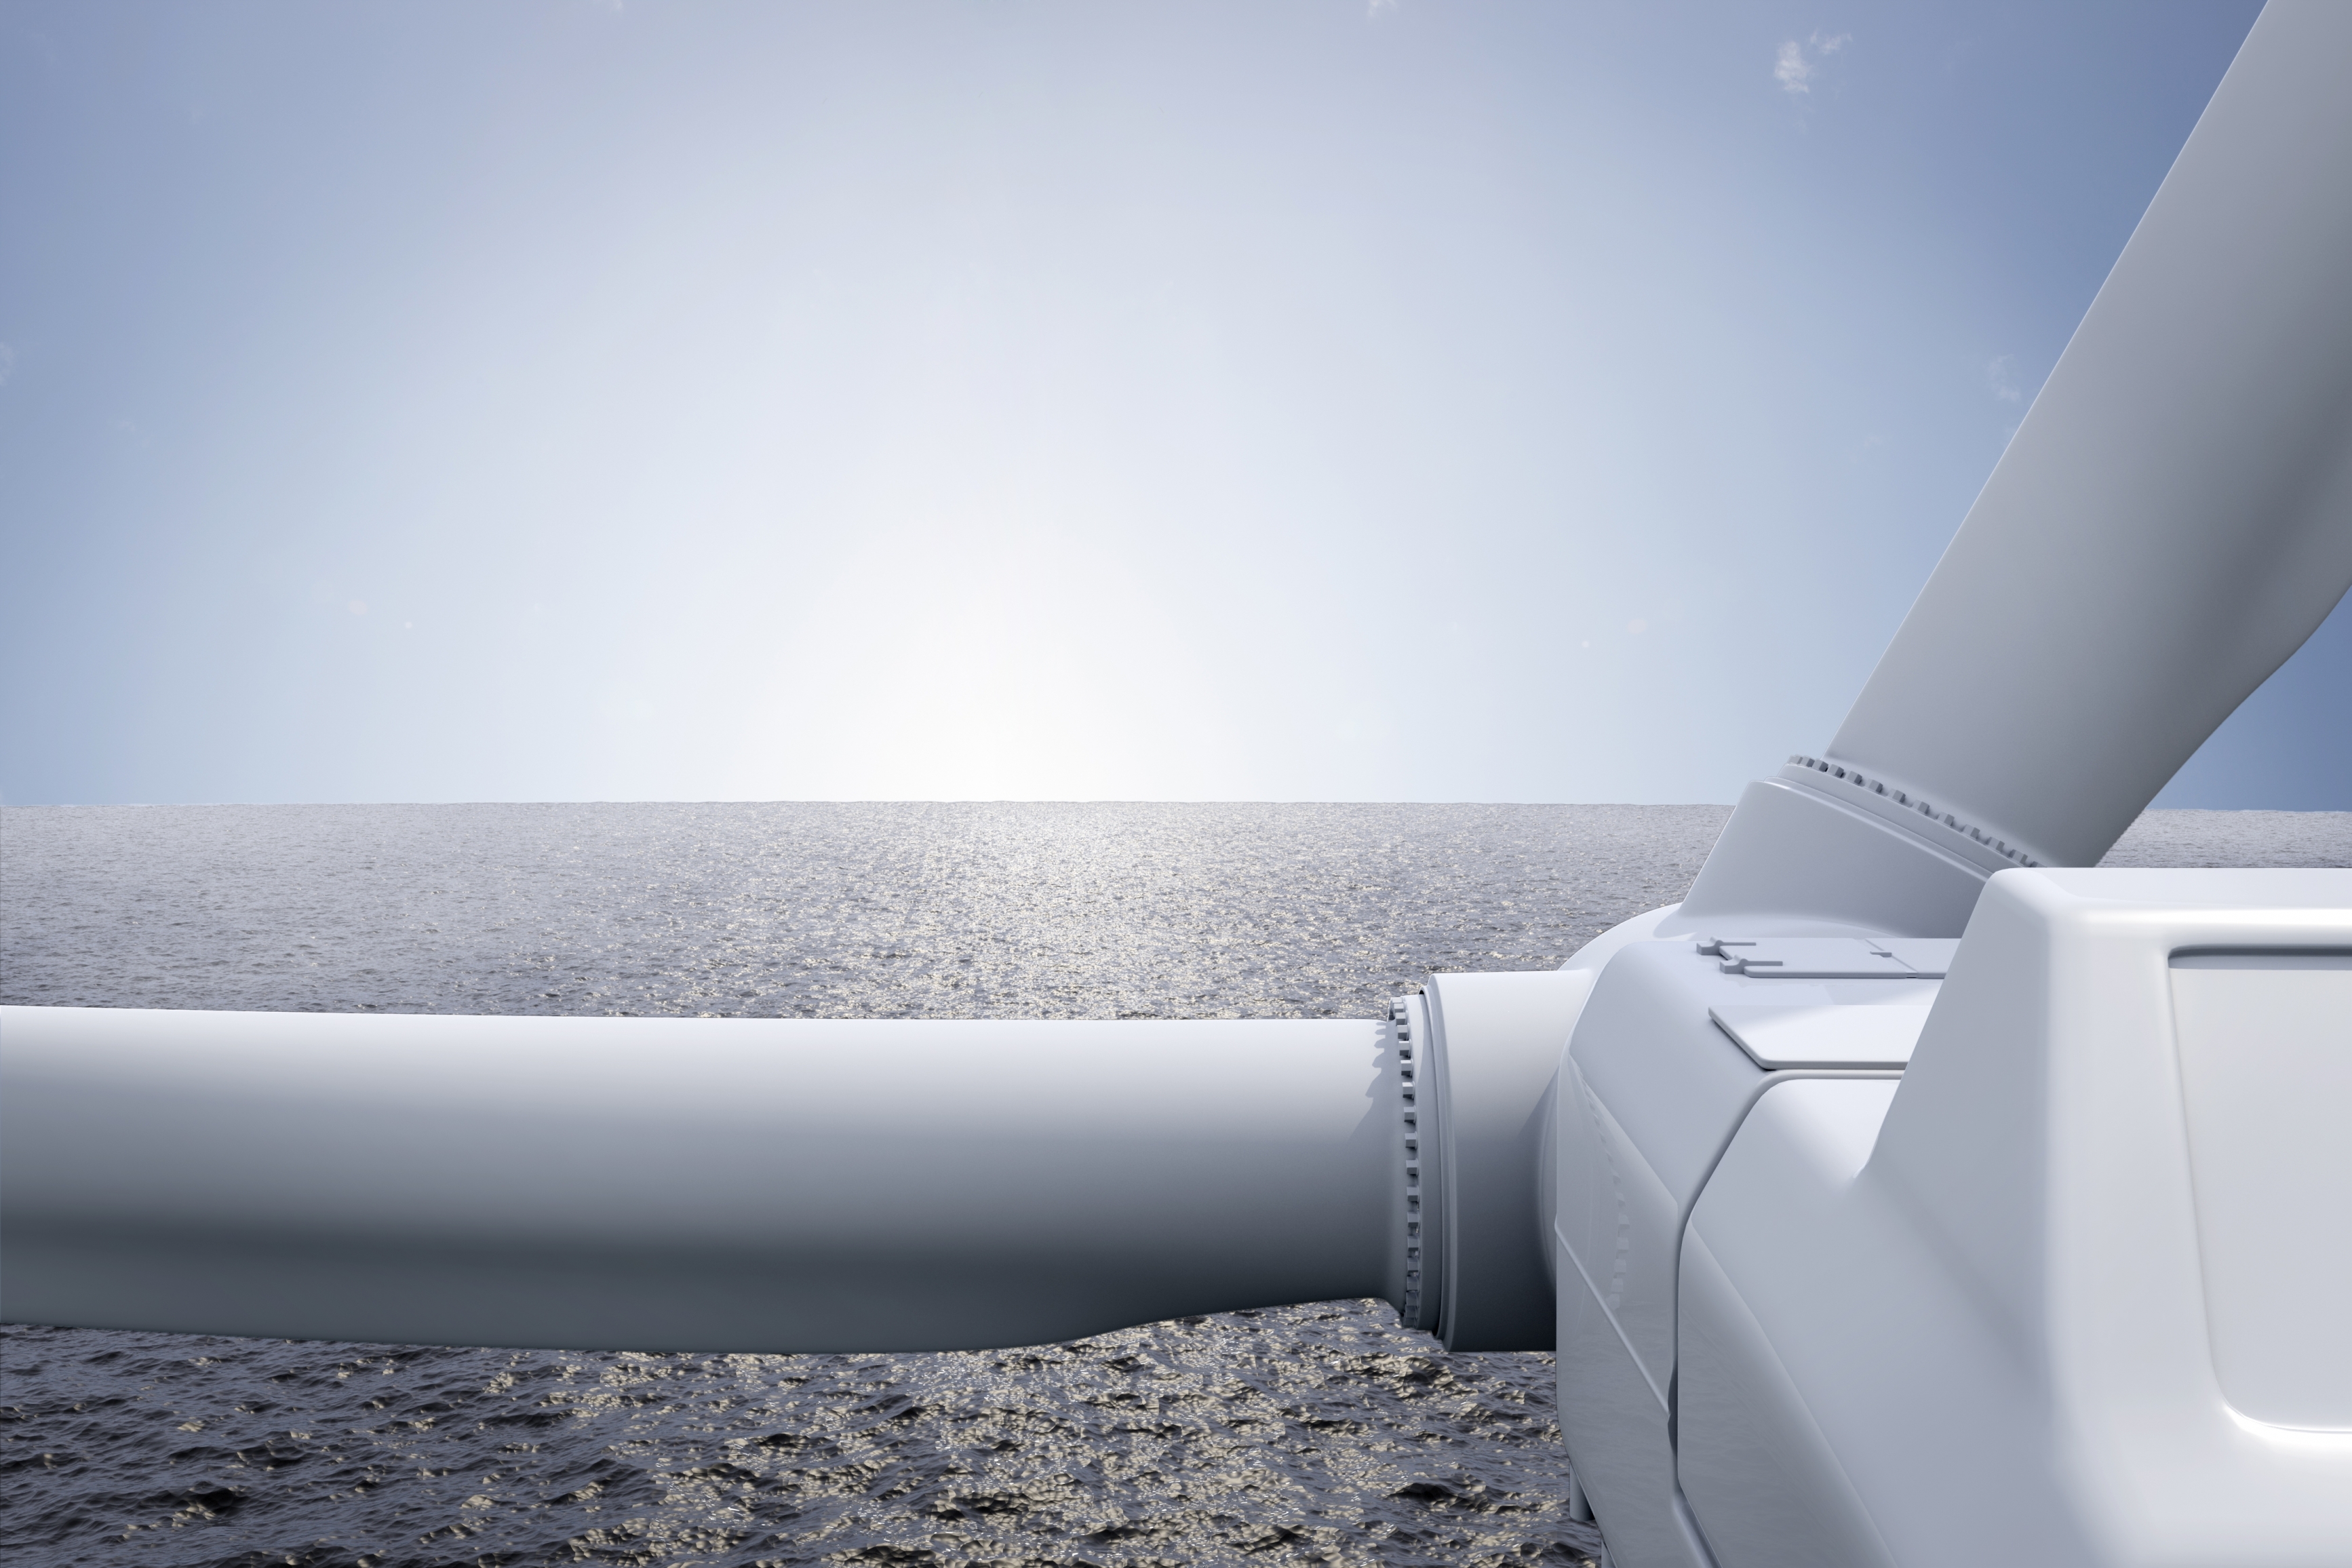 A photo of an offshore wind turbine taken from nacelle level